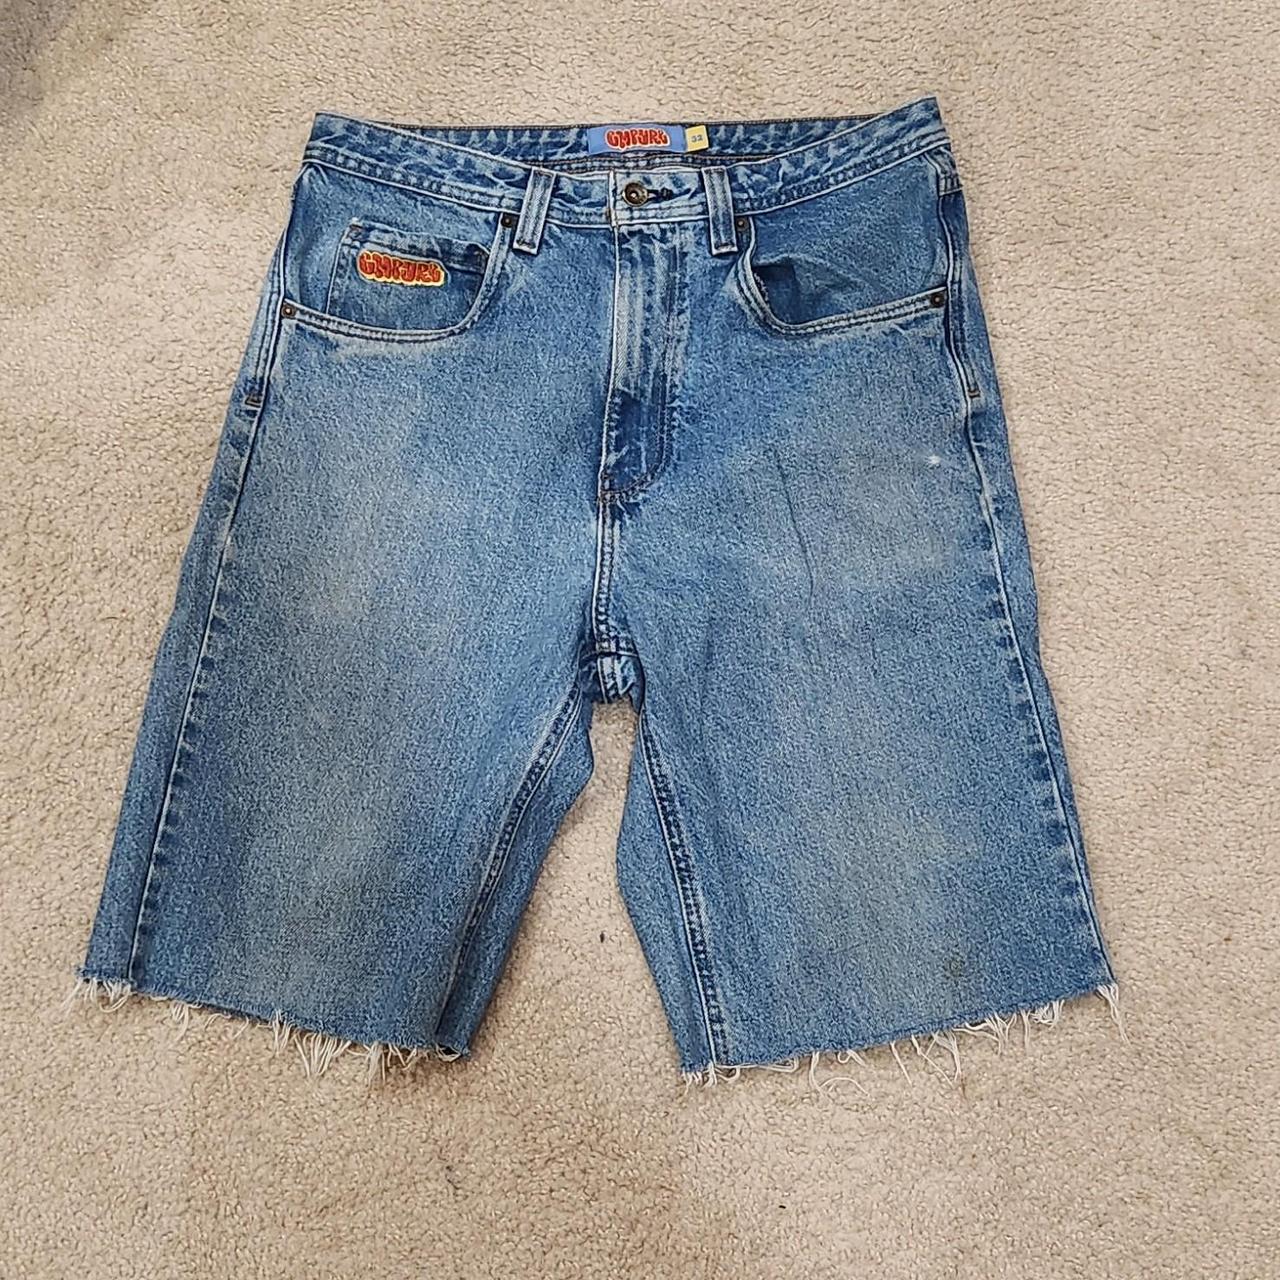 Empyre jorts, they were jeans but I cut them into... - Depop